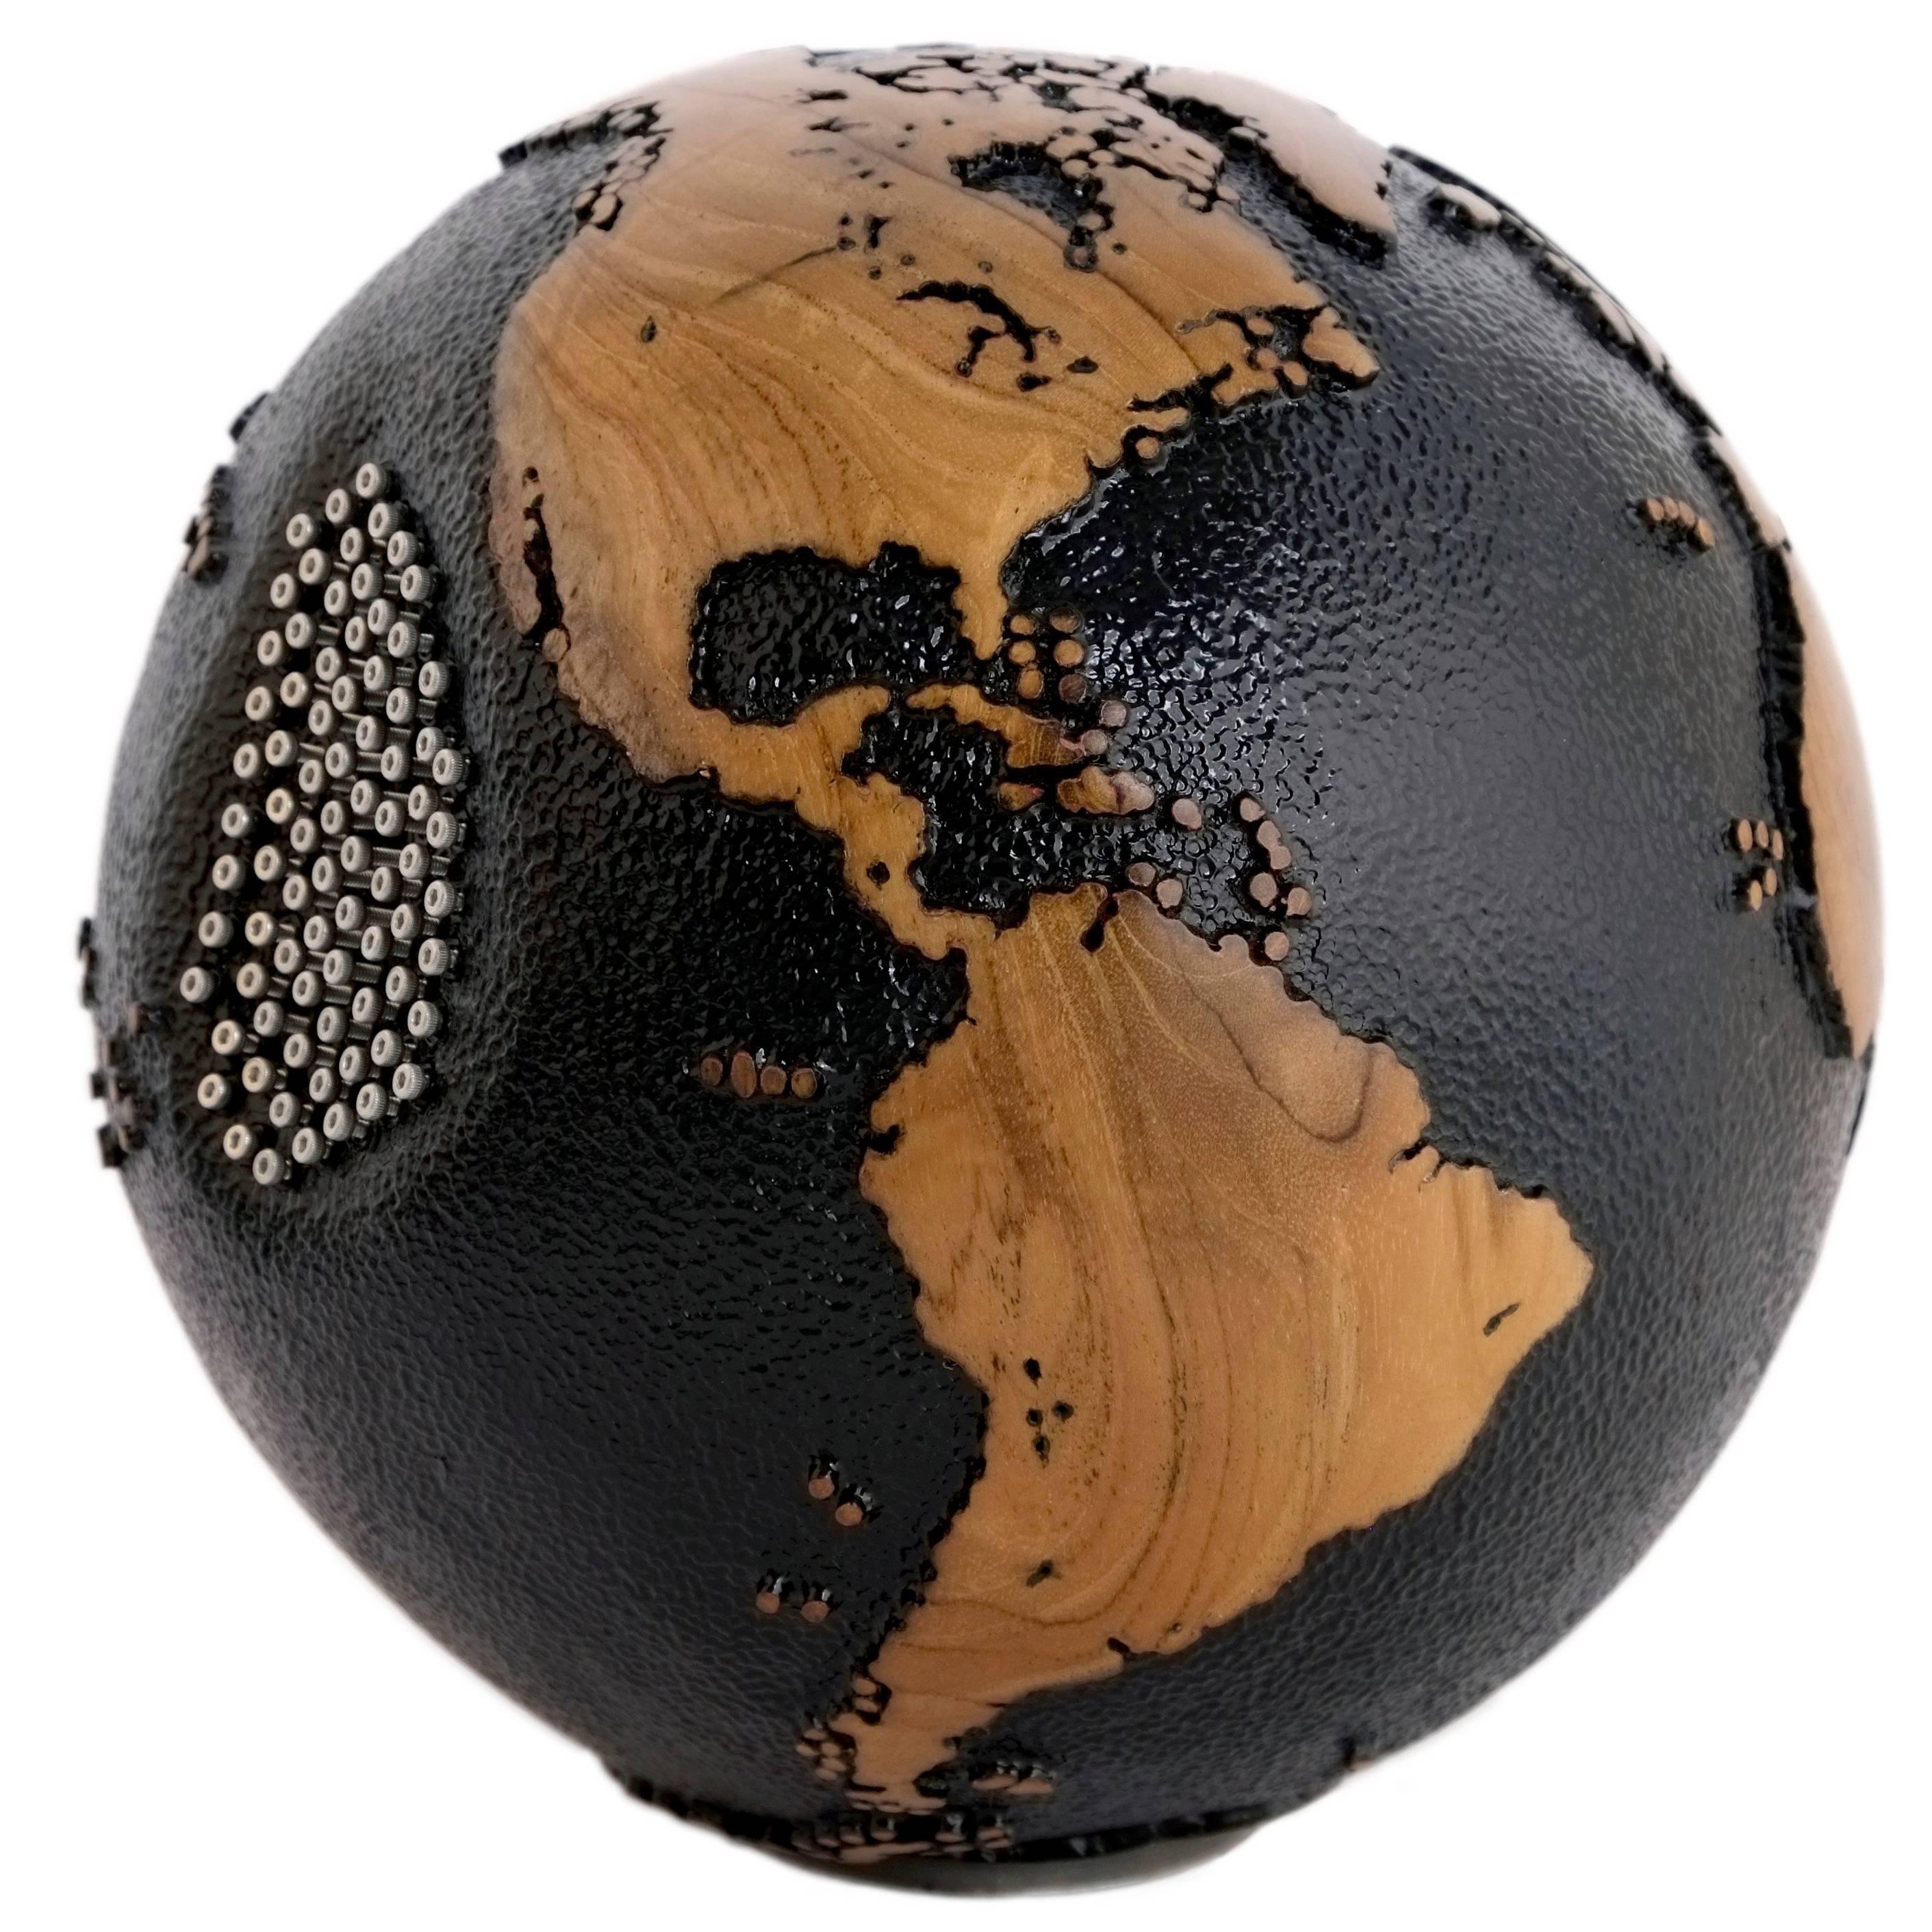 Superb Black Beauty Wooden Globe with 79 Stainless Bolts, 20 cm, Saturday Sale For Sale